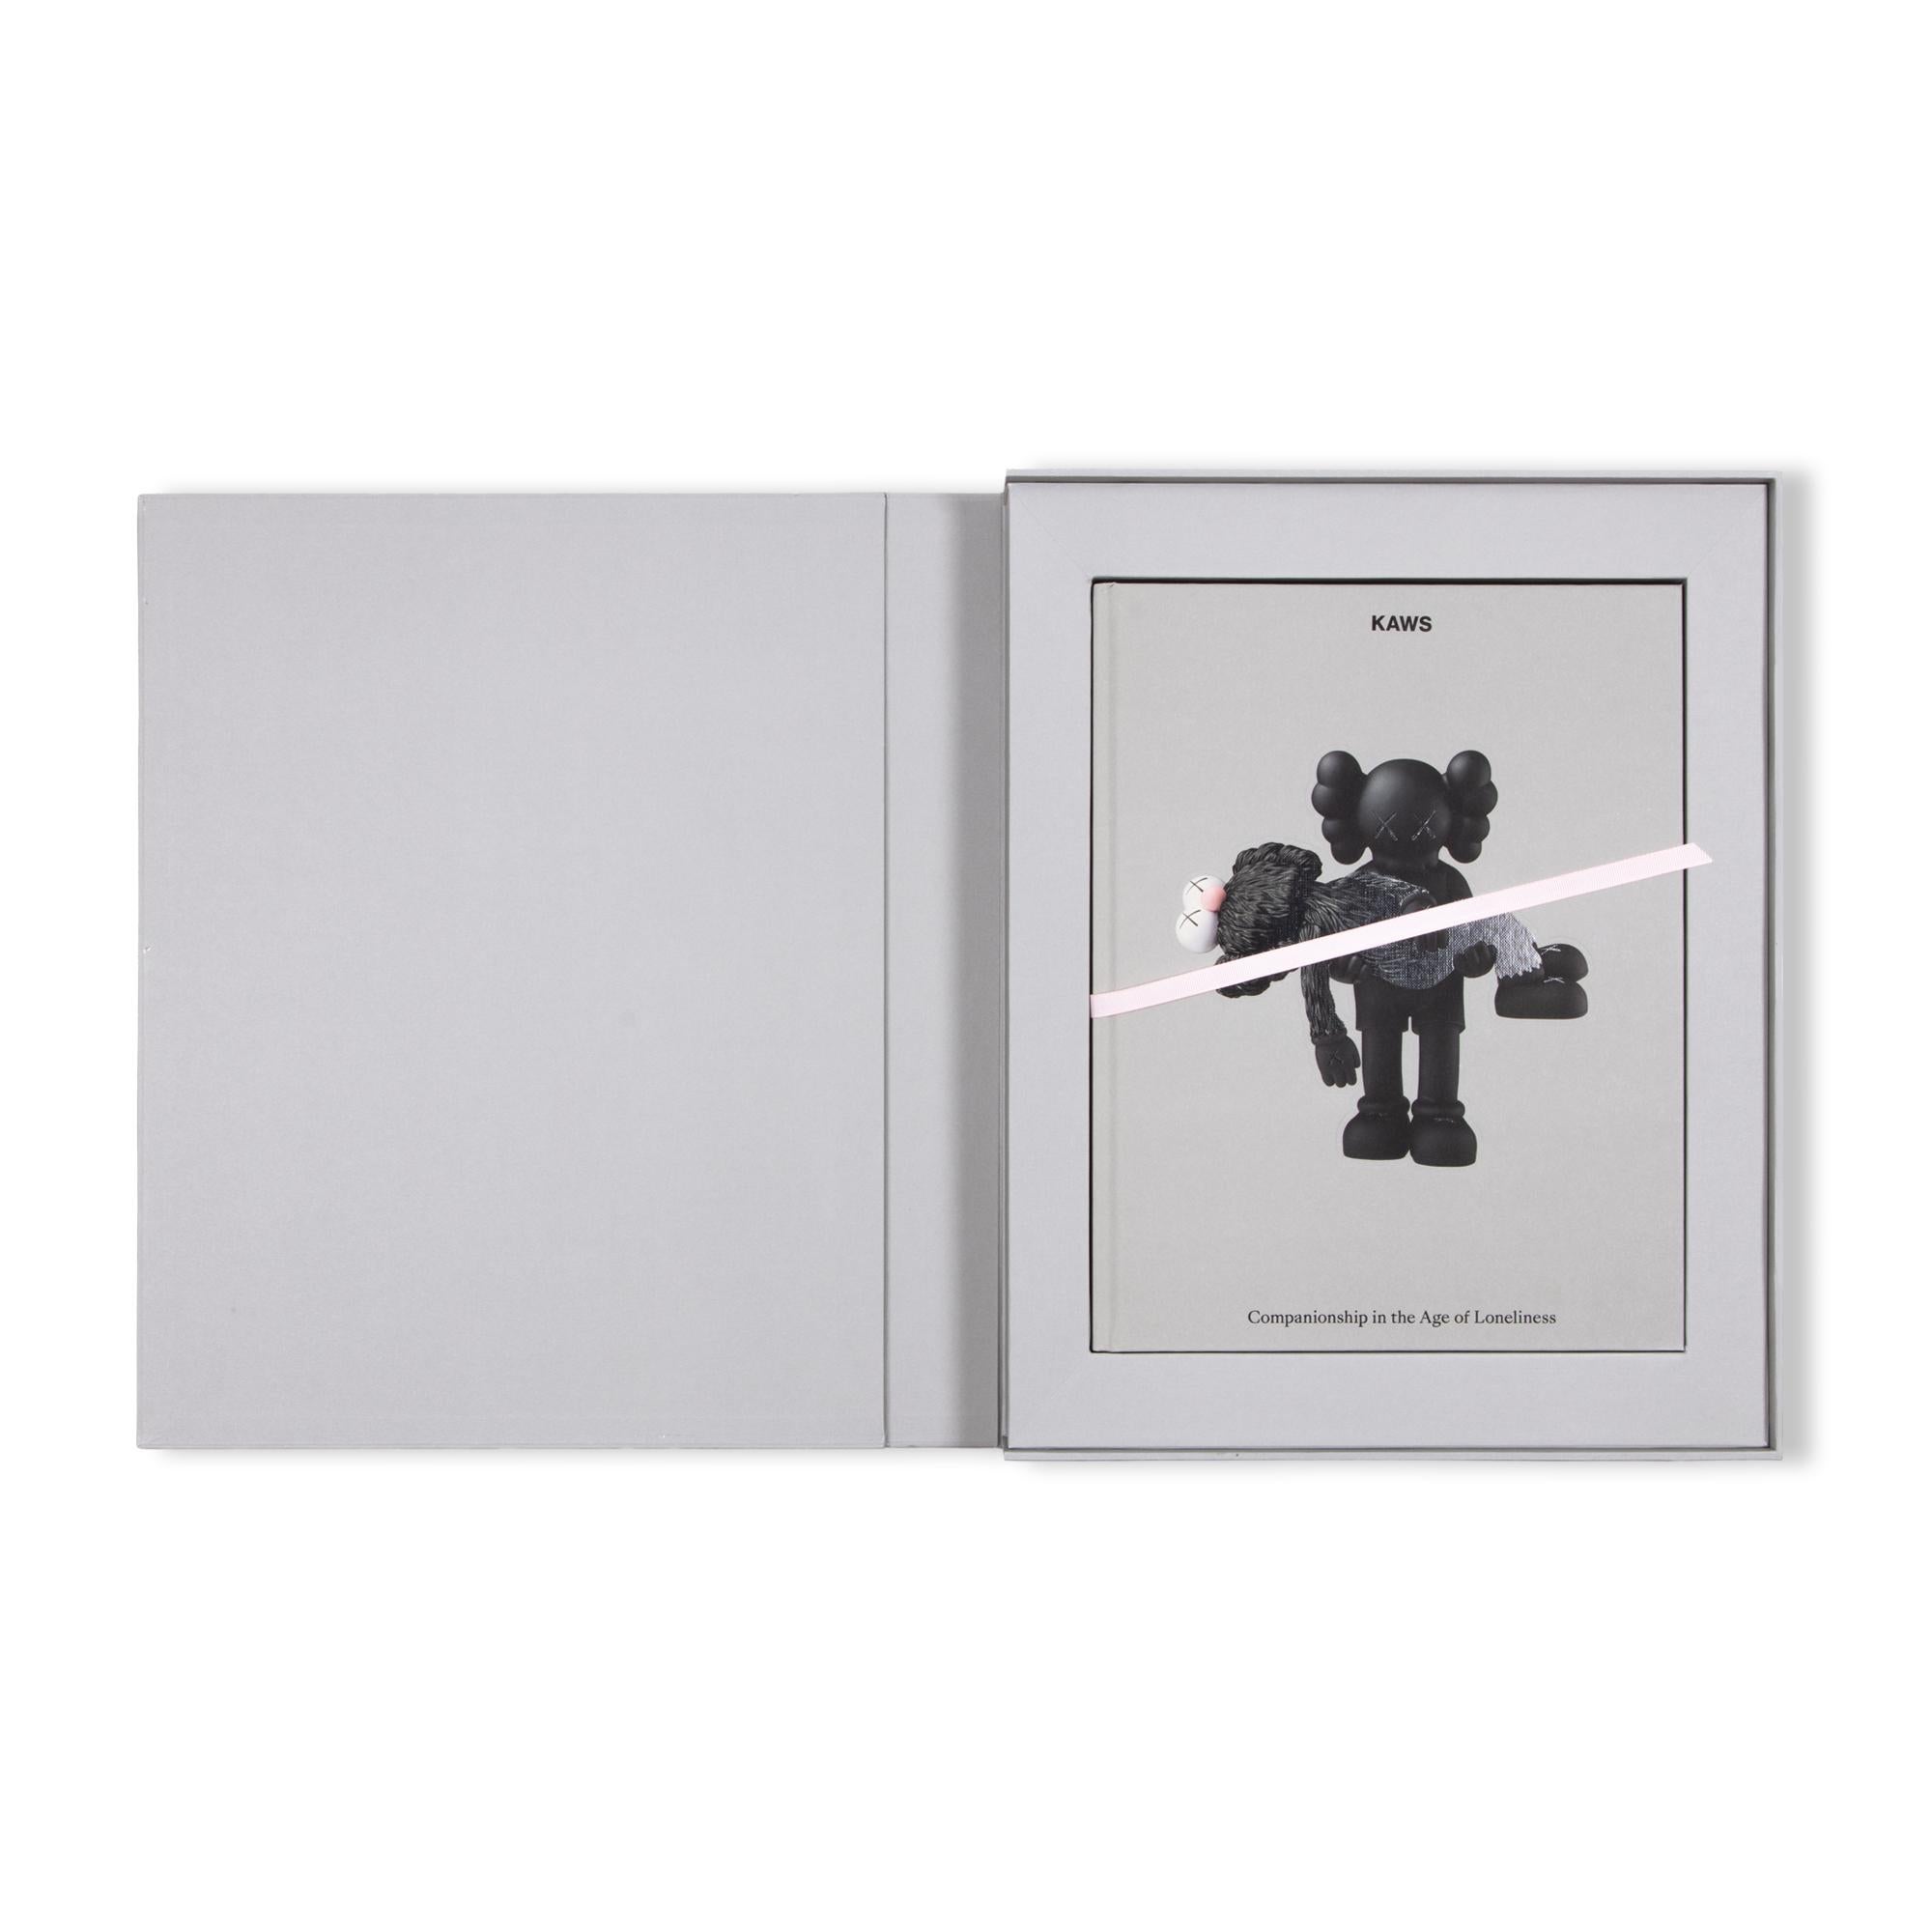 KAWS, Gone - Screenprint incl. Limited Edition Catalogue, Signed Print For Sale 4